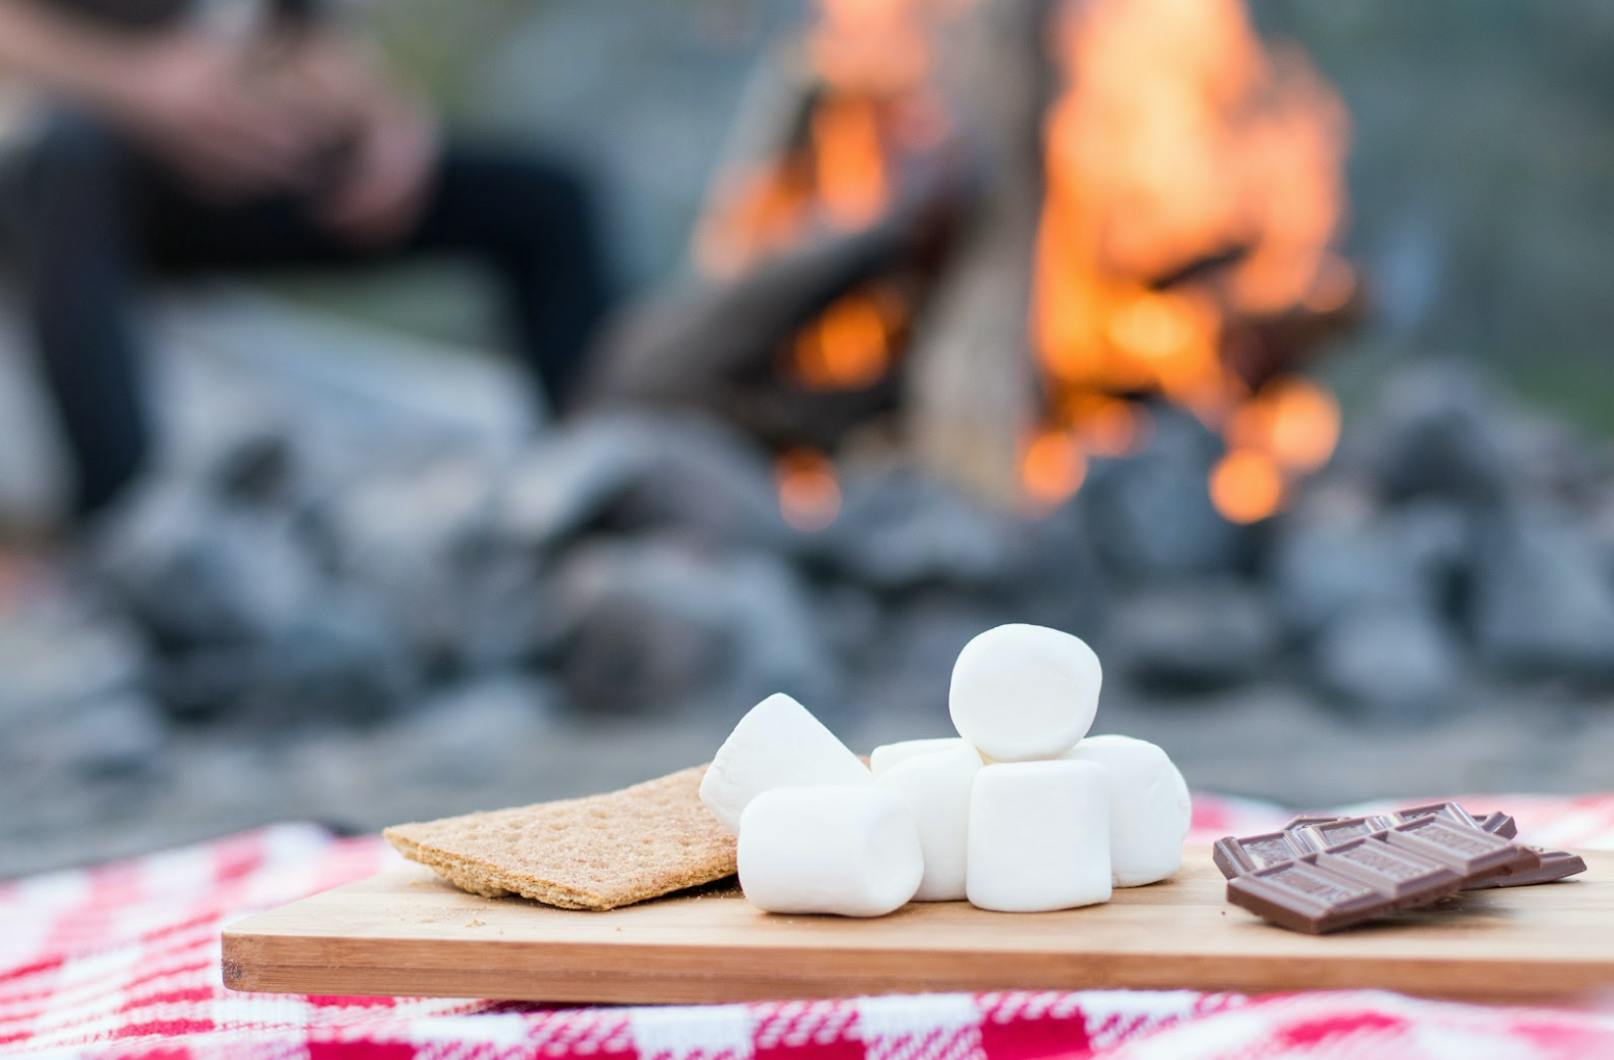 A graham cracker, chocolate, and marshmallows on a table with a fire in the background.